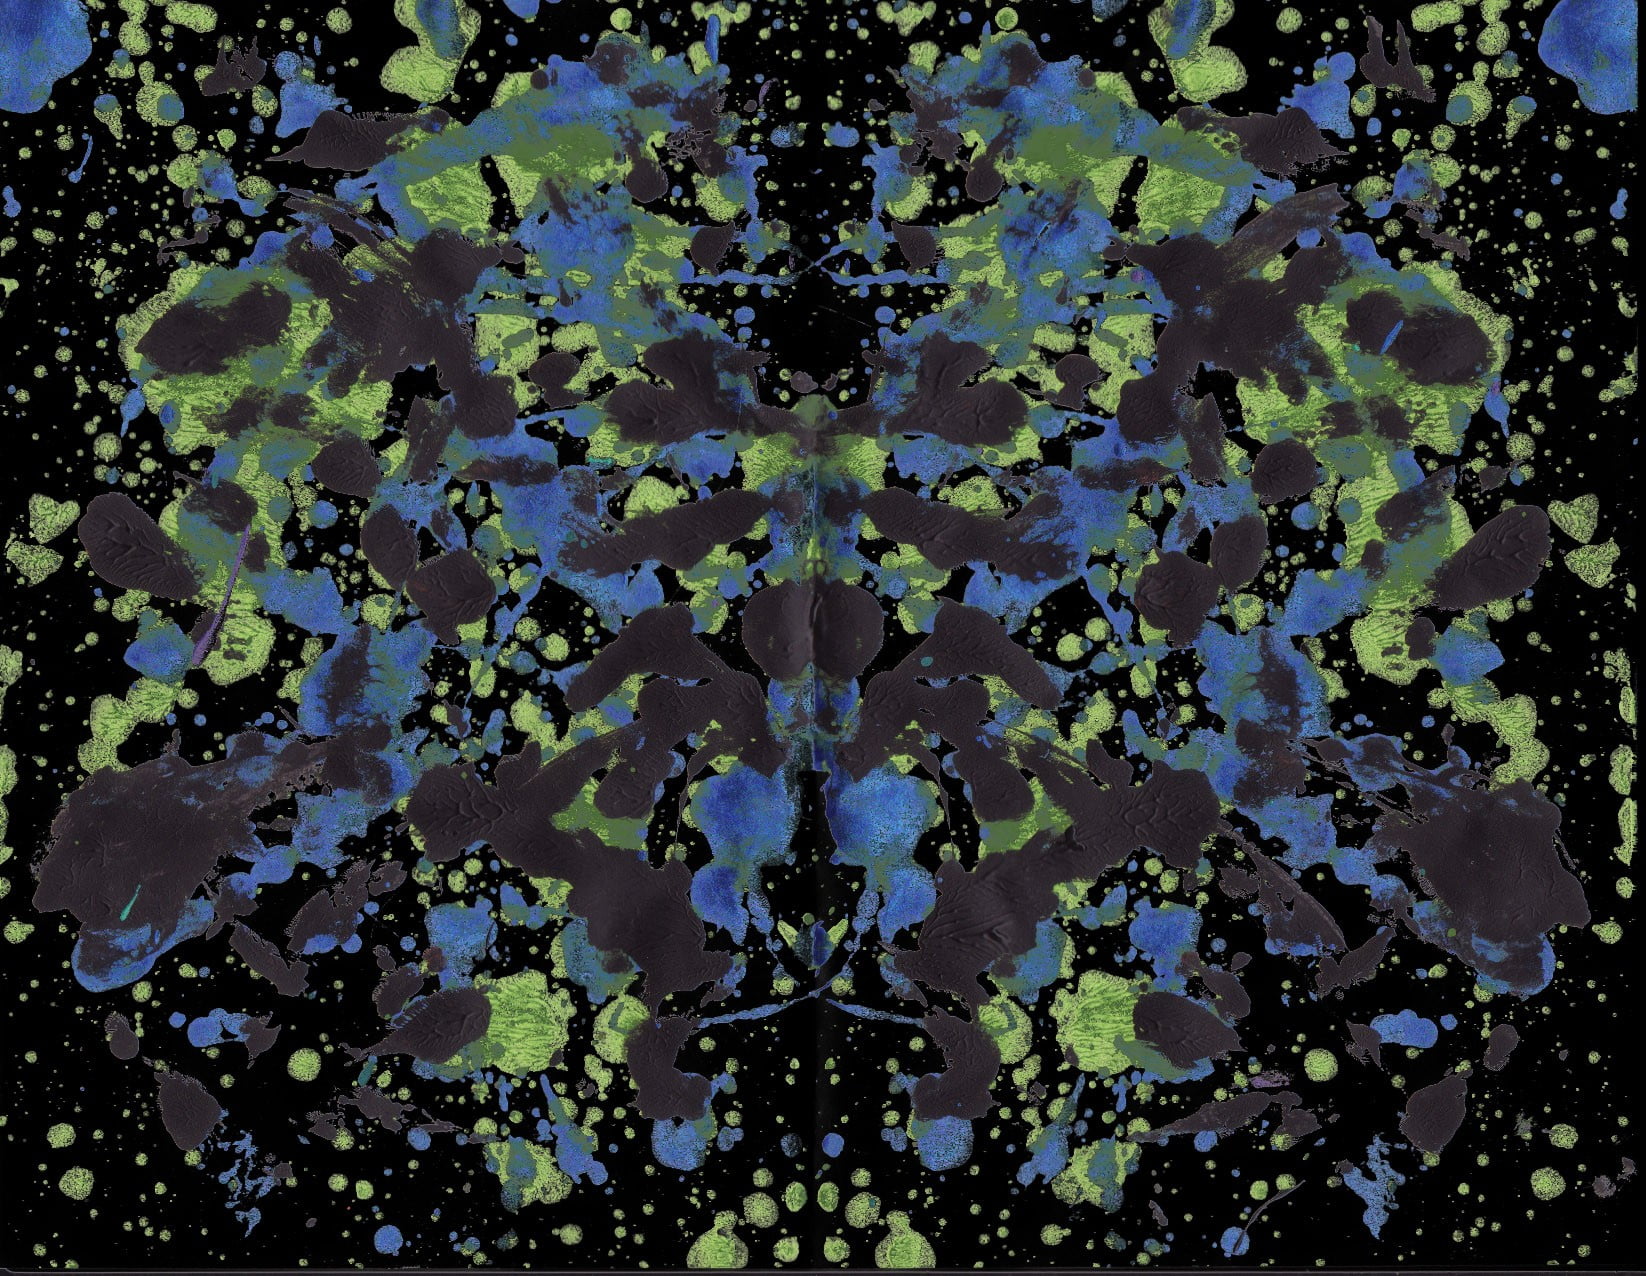 black, green, and blue painting, ink, paint splatter, symmetry, Rorschach test